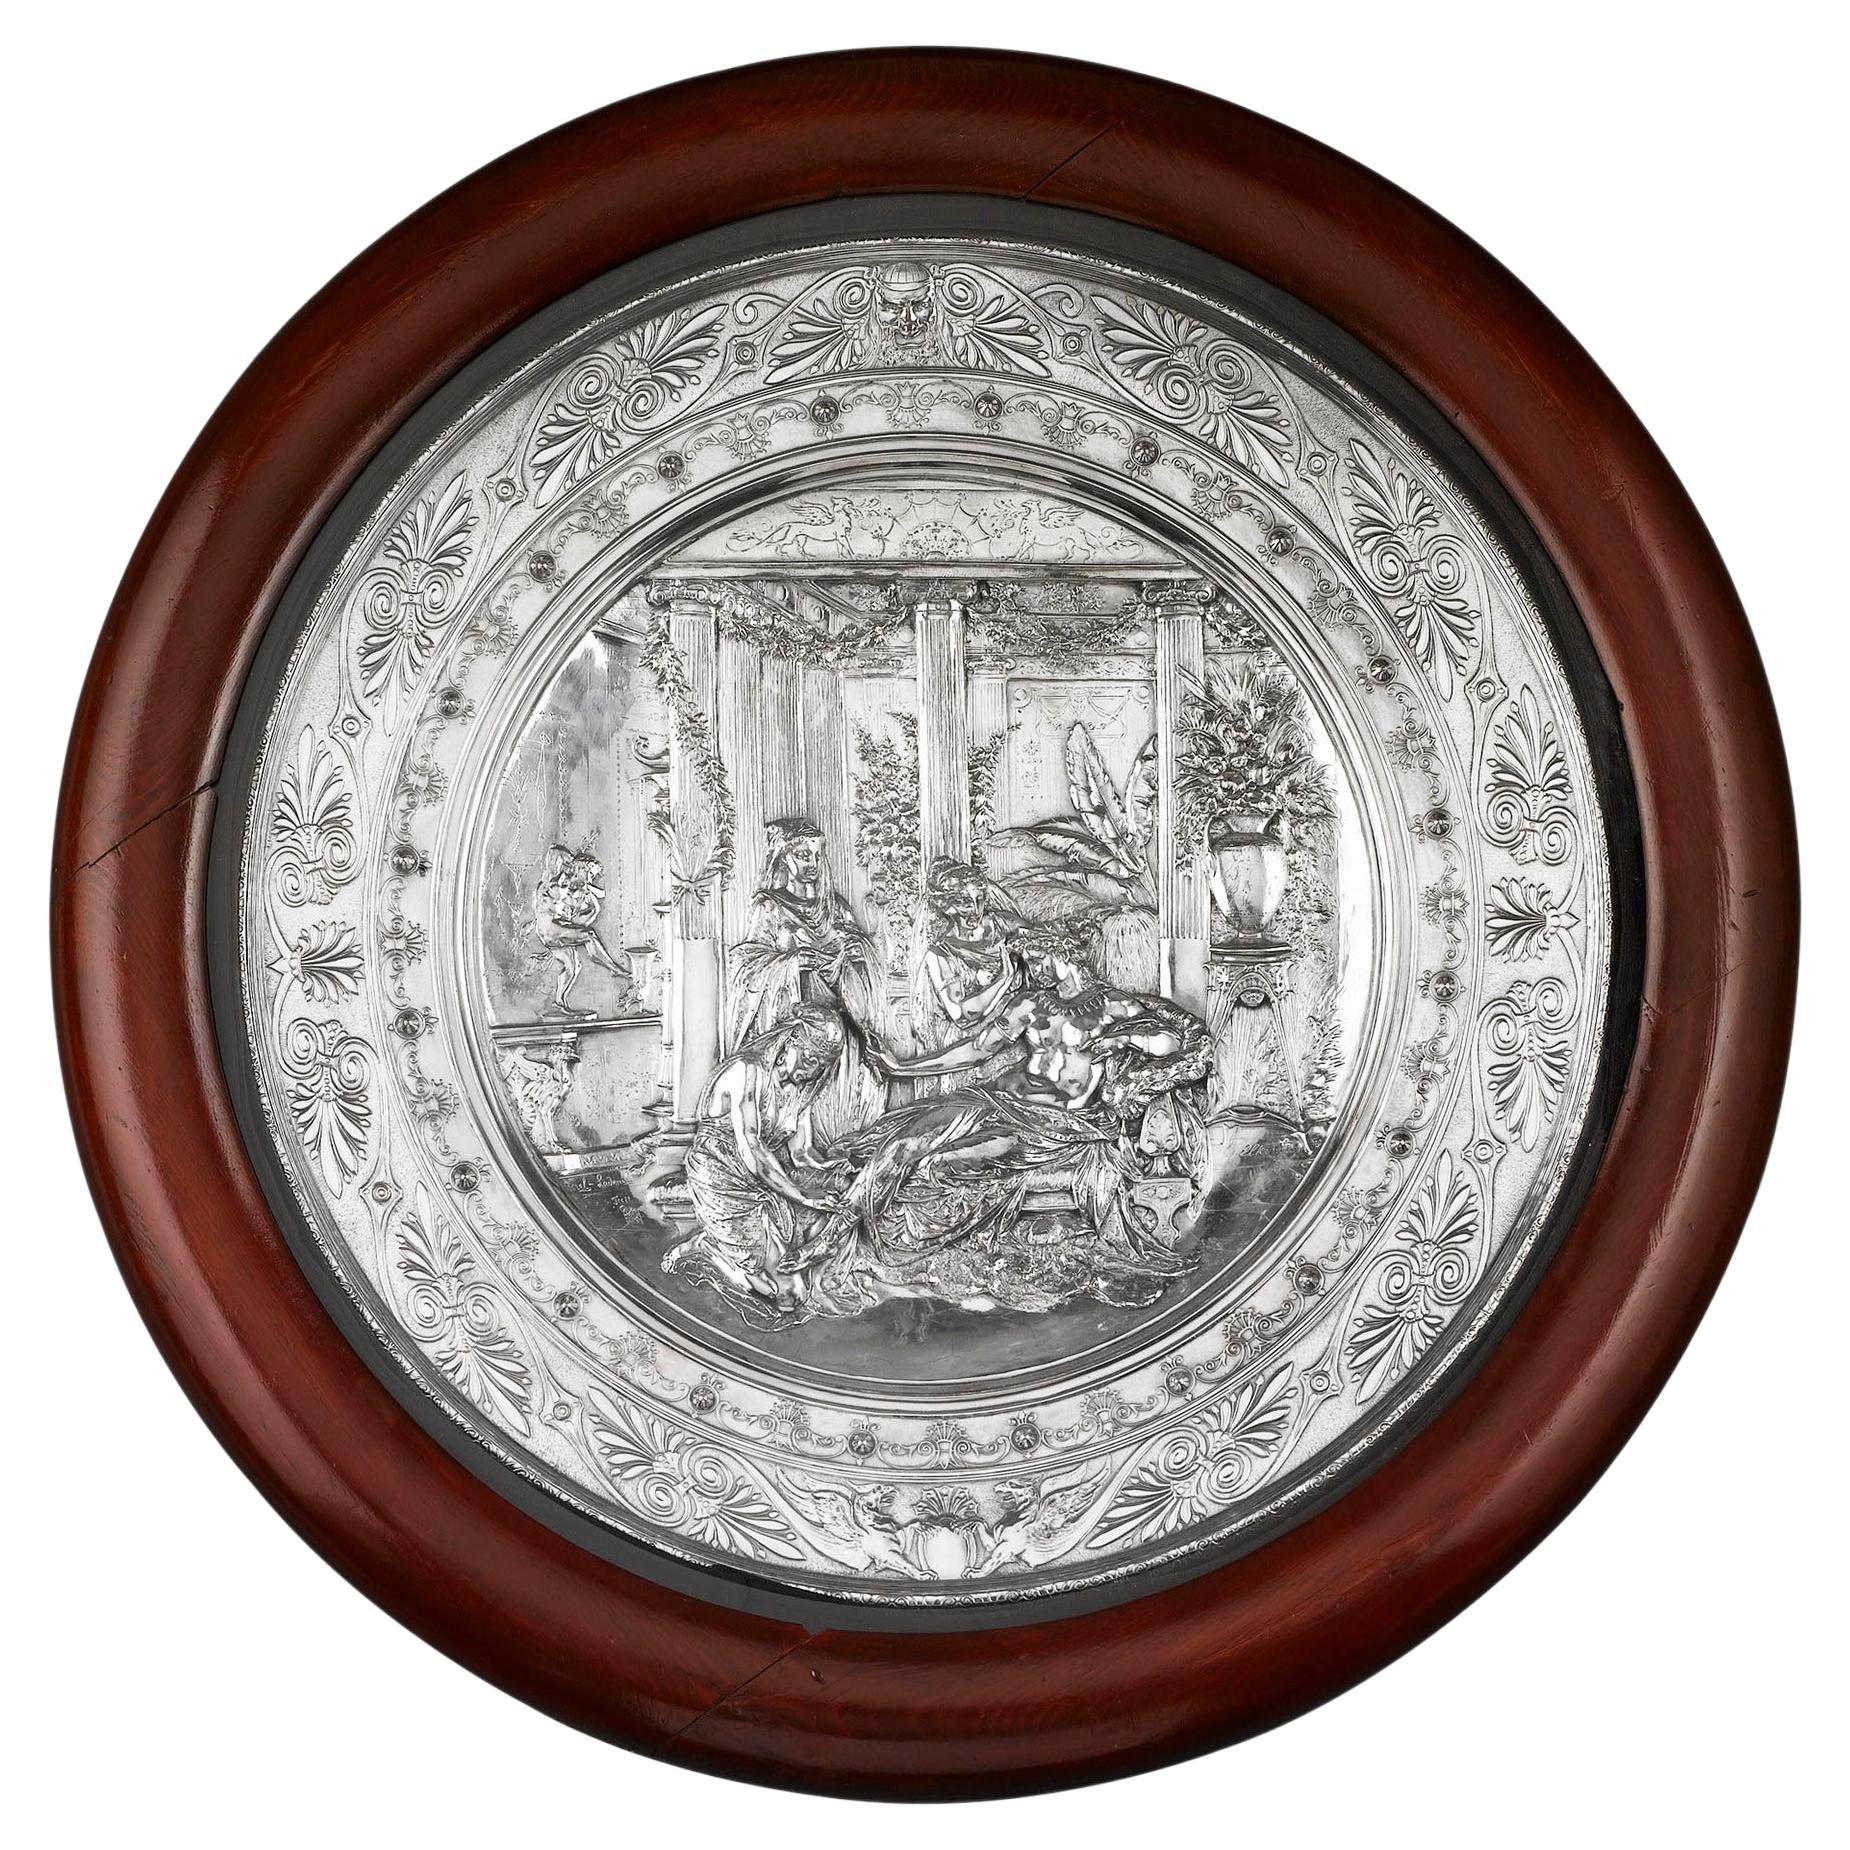 Elkington & Co. Silverplate Charger by Morel-Ladeuil For Sale